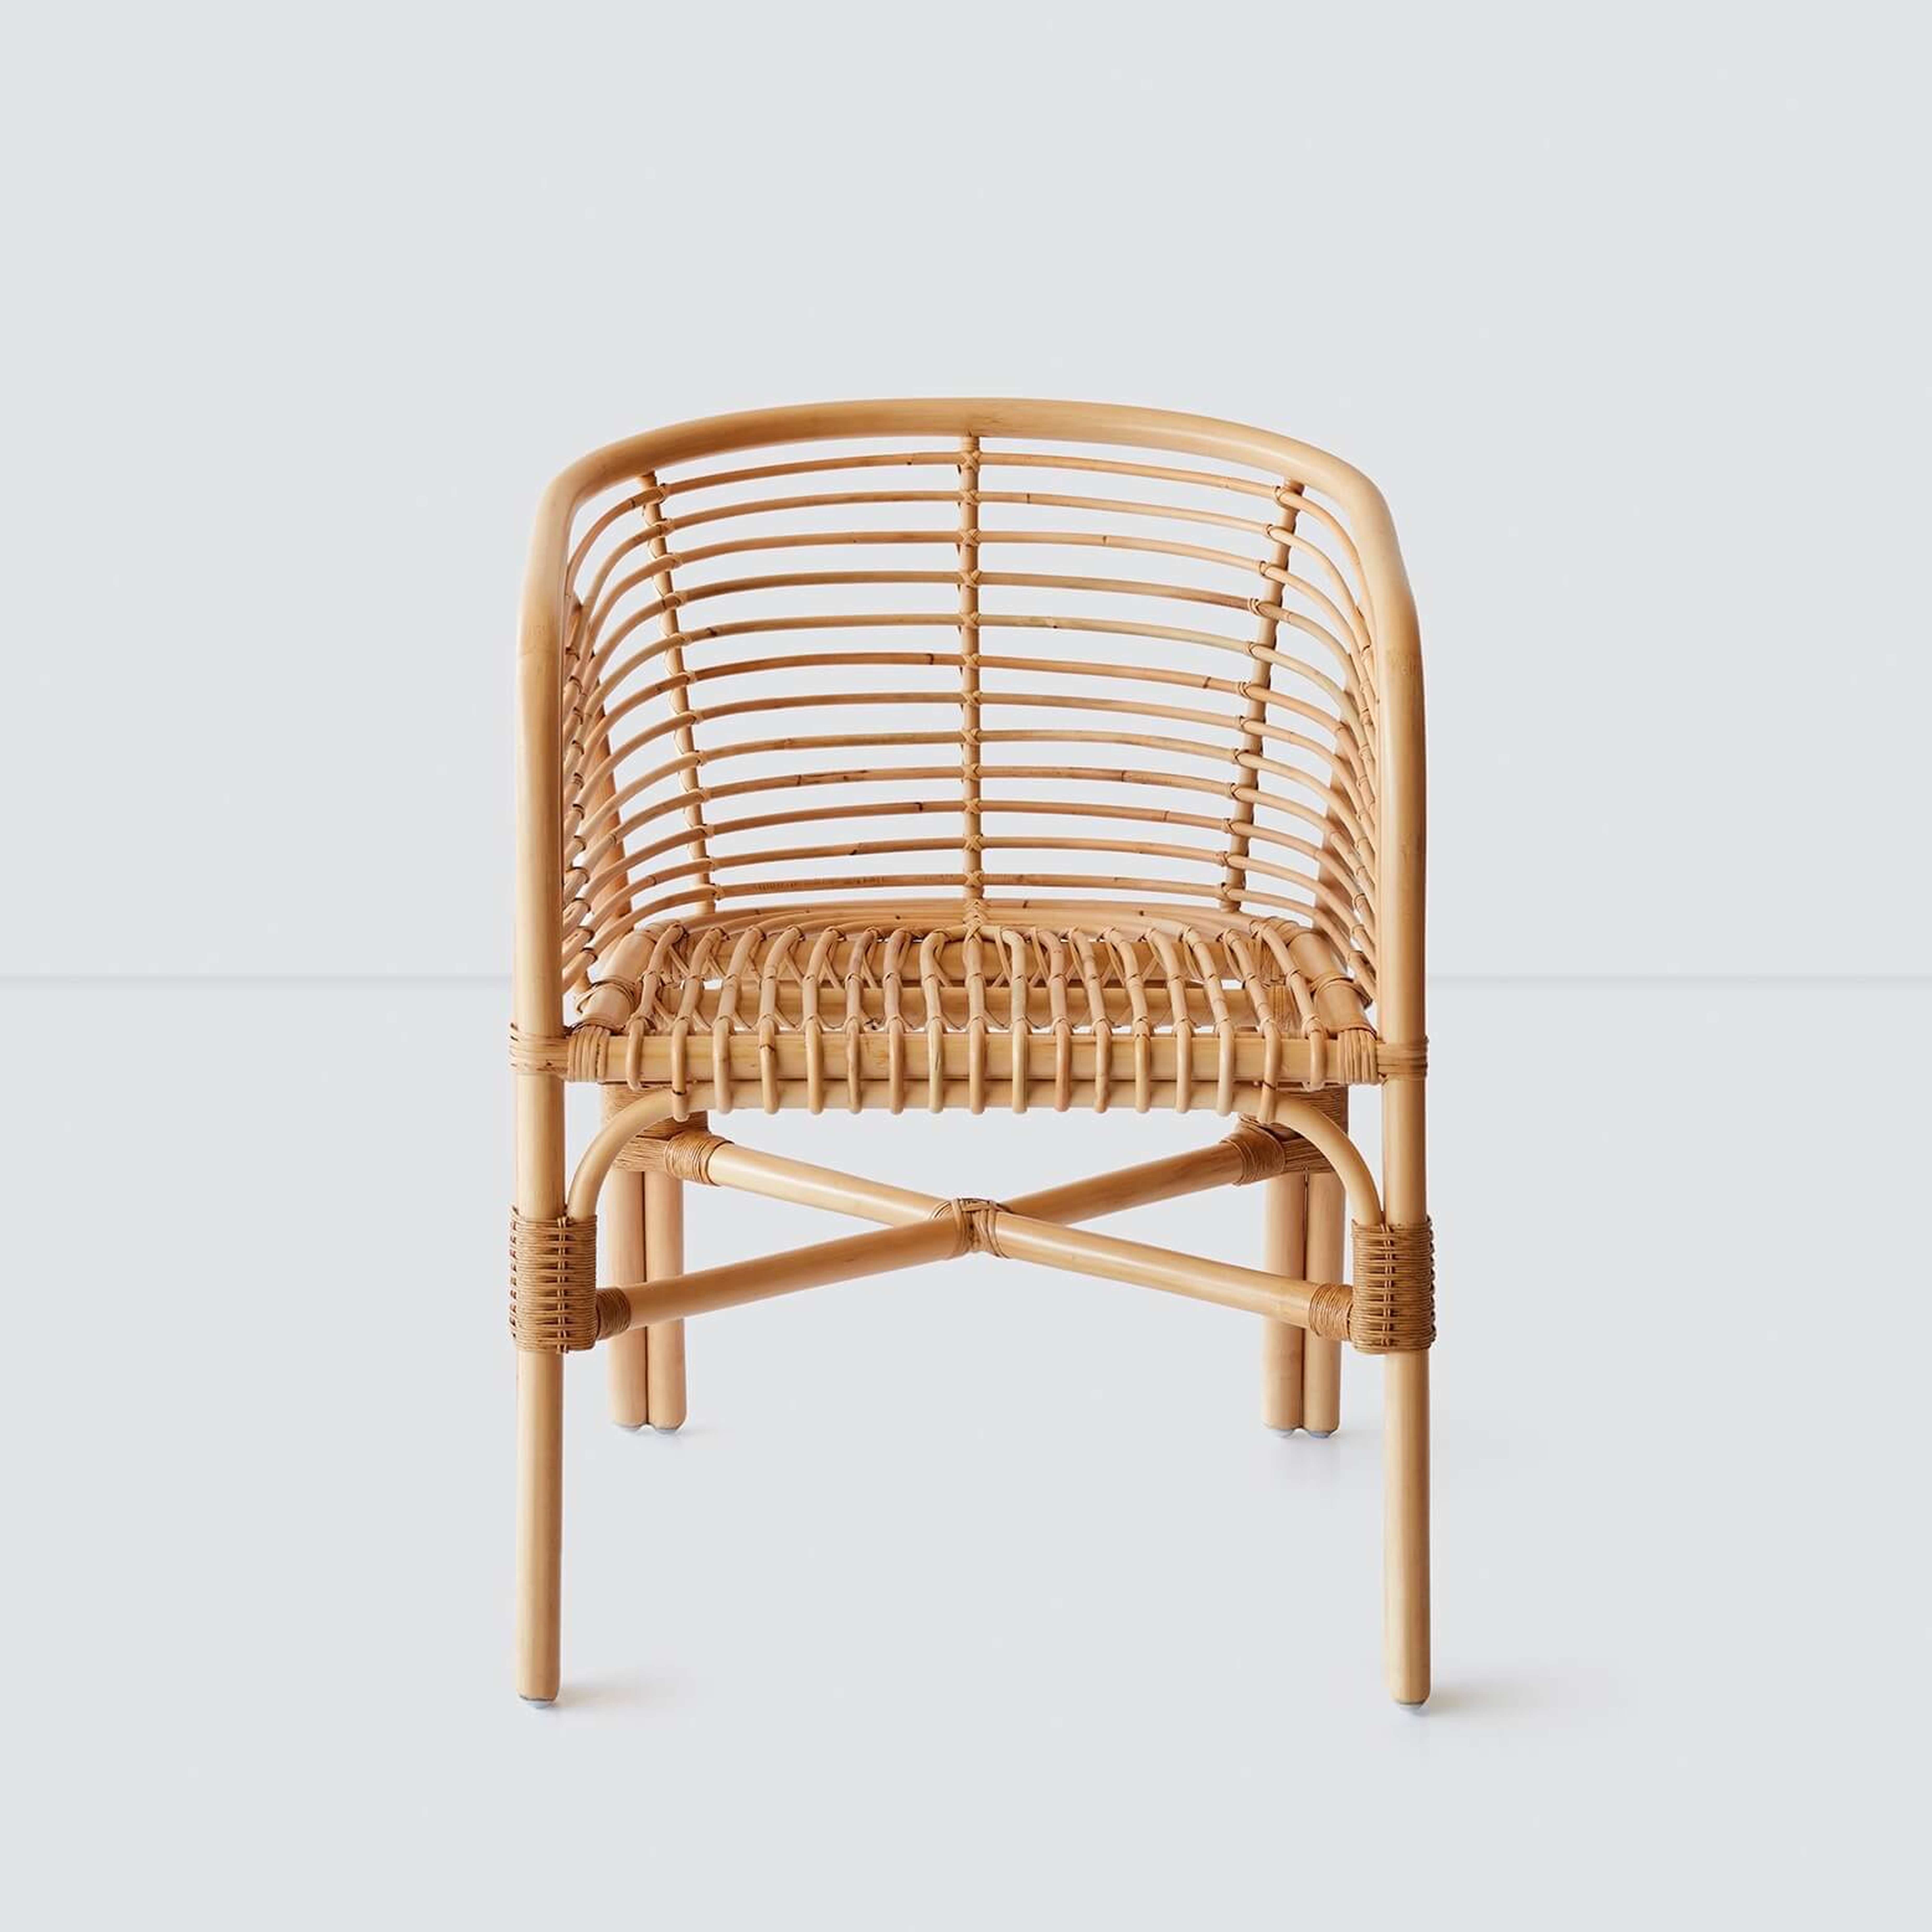 Lombok Rattan Lounge Chair By The Citizenry - The Citizenry